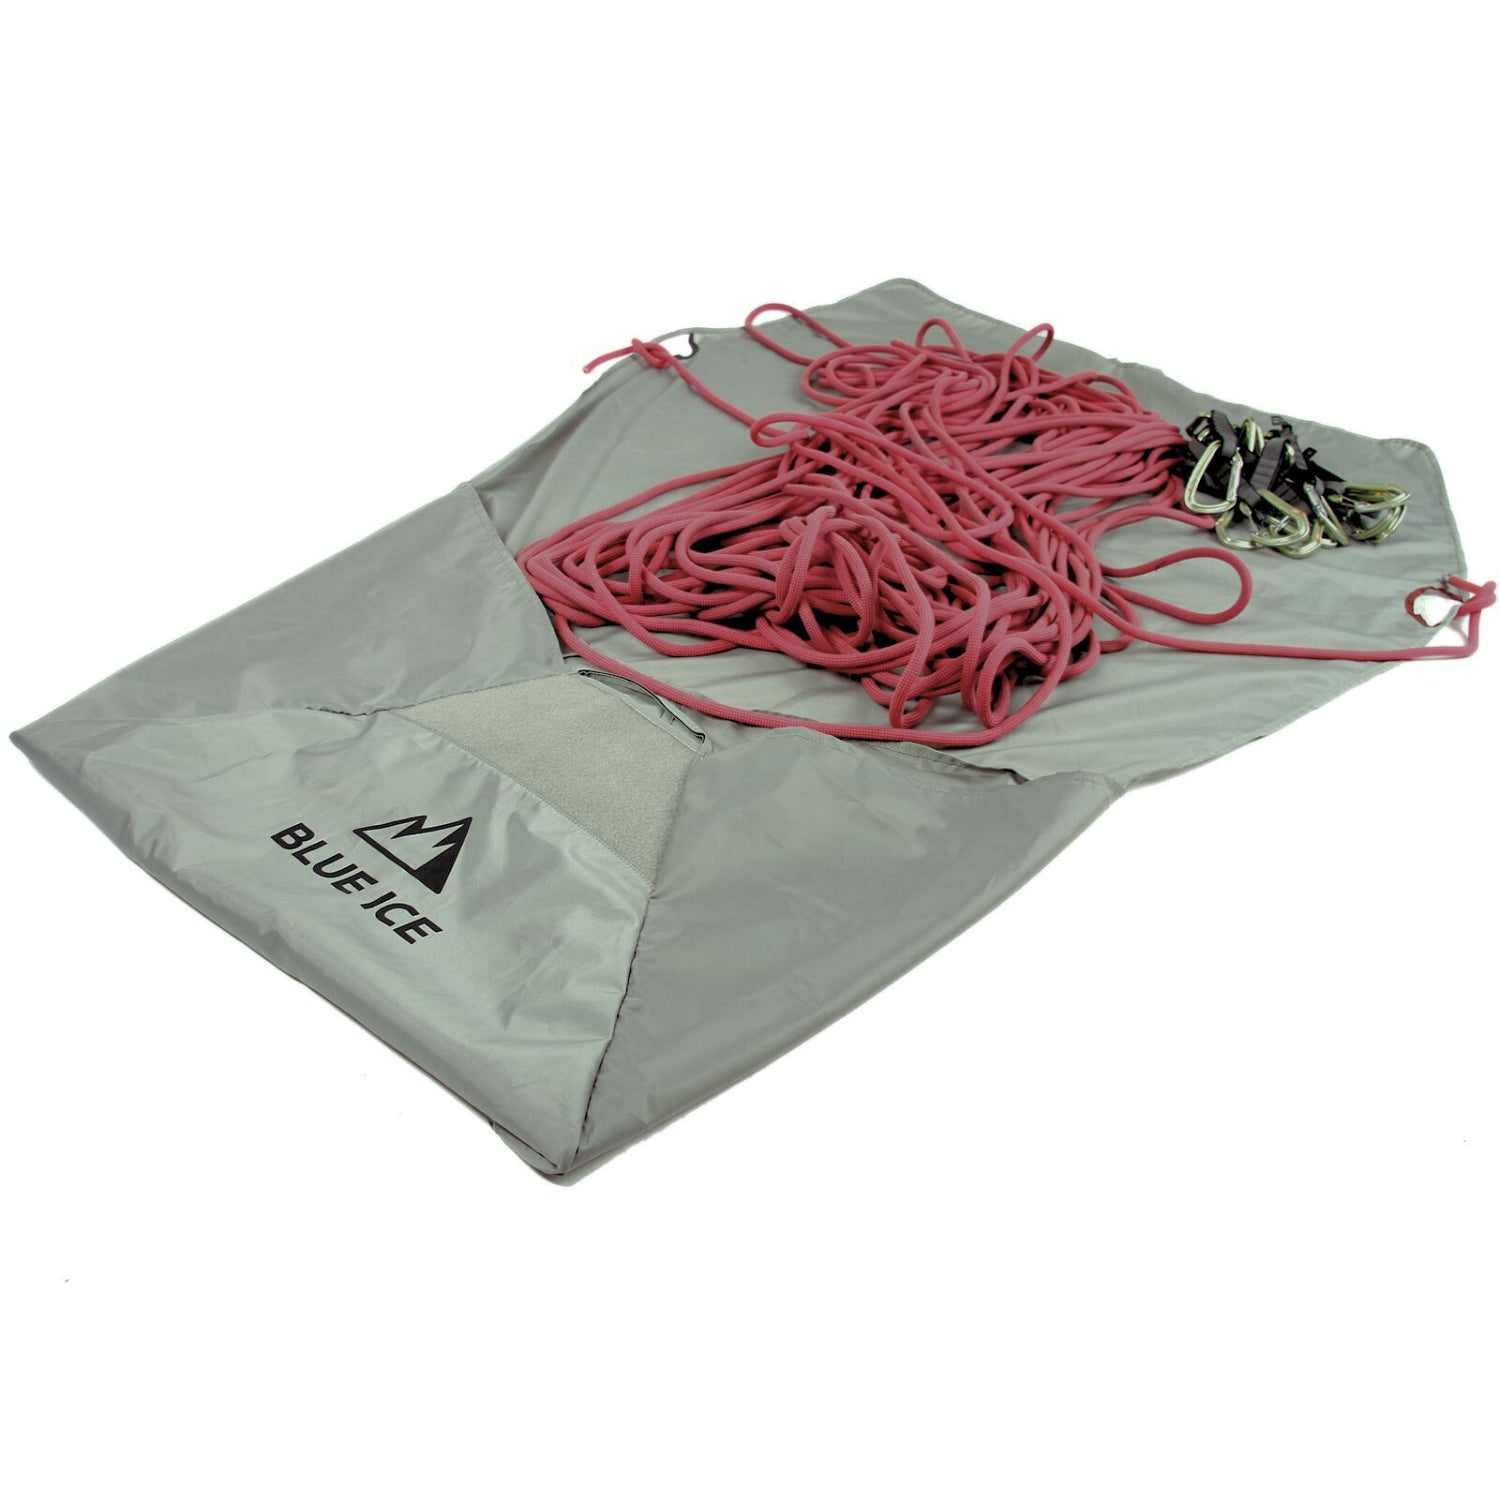 Blue Ice Rope Tarp with rope and quickdraws